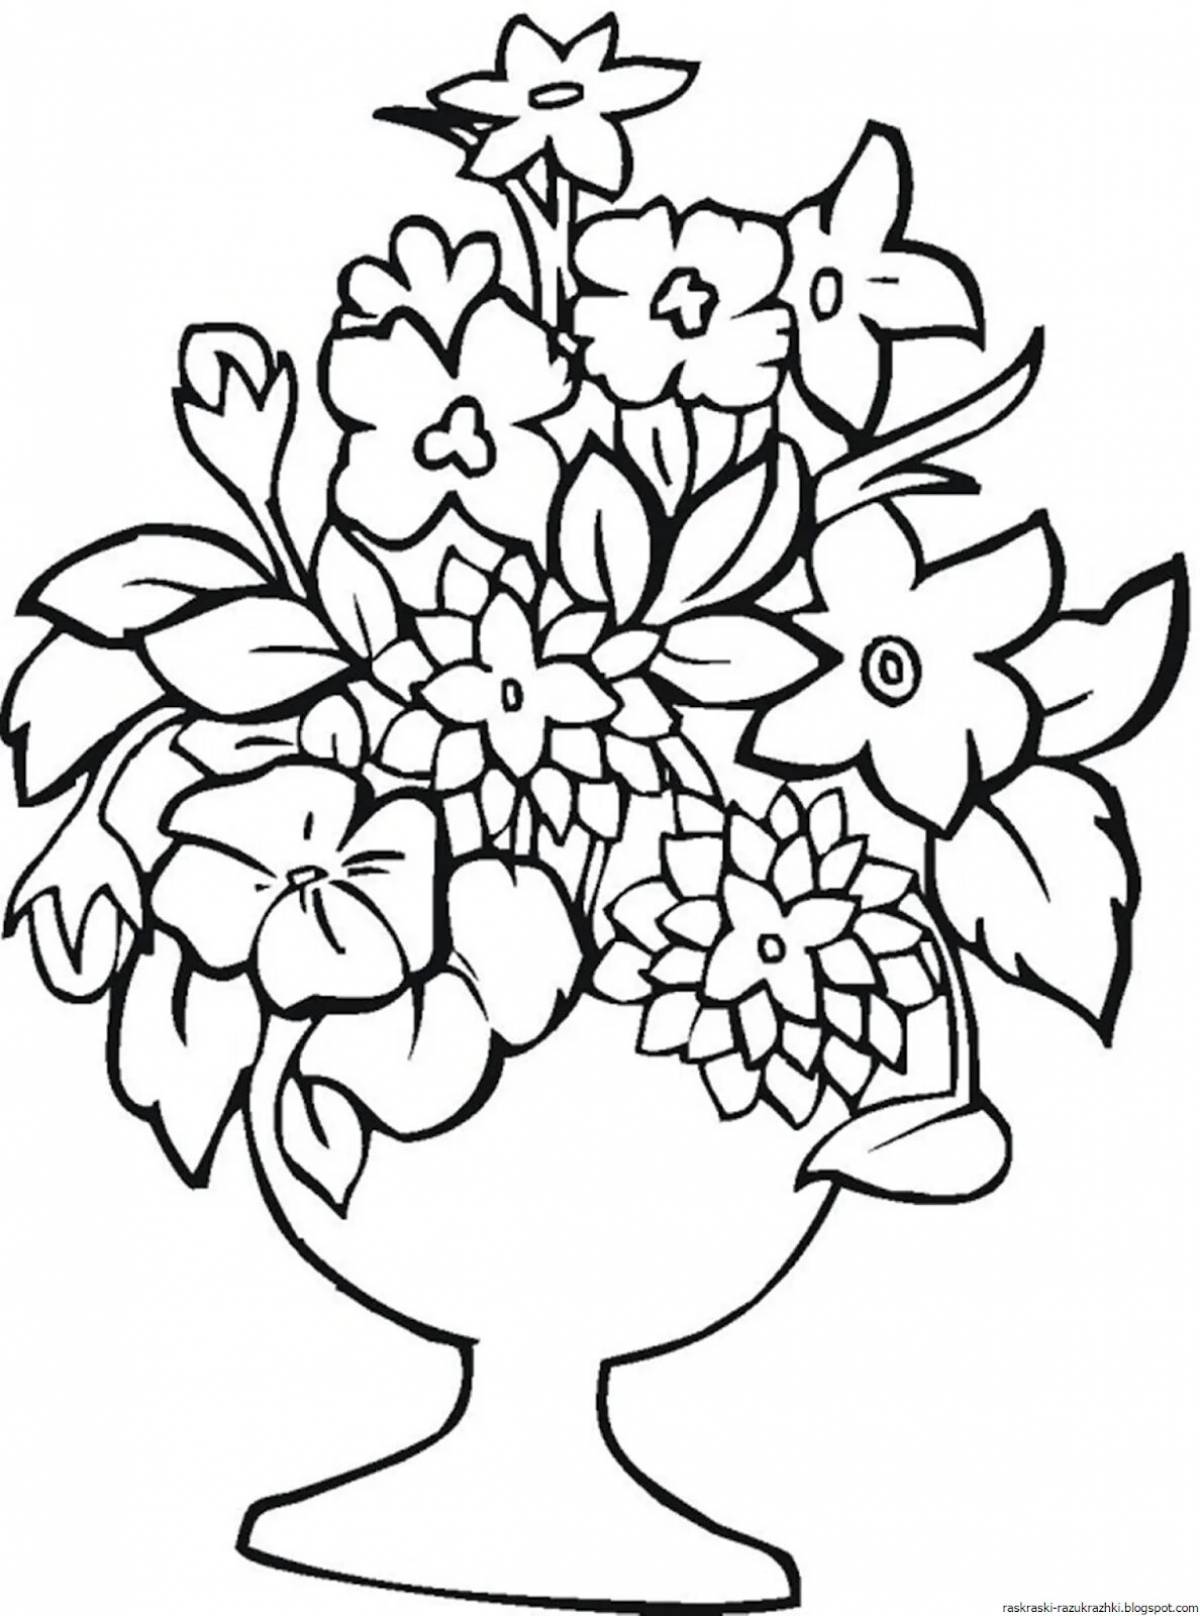 Glamorous bouquet coloring page for students